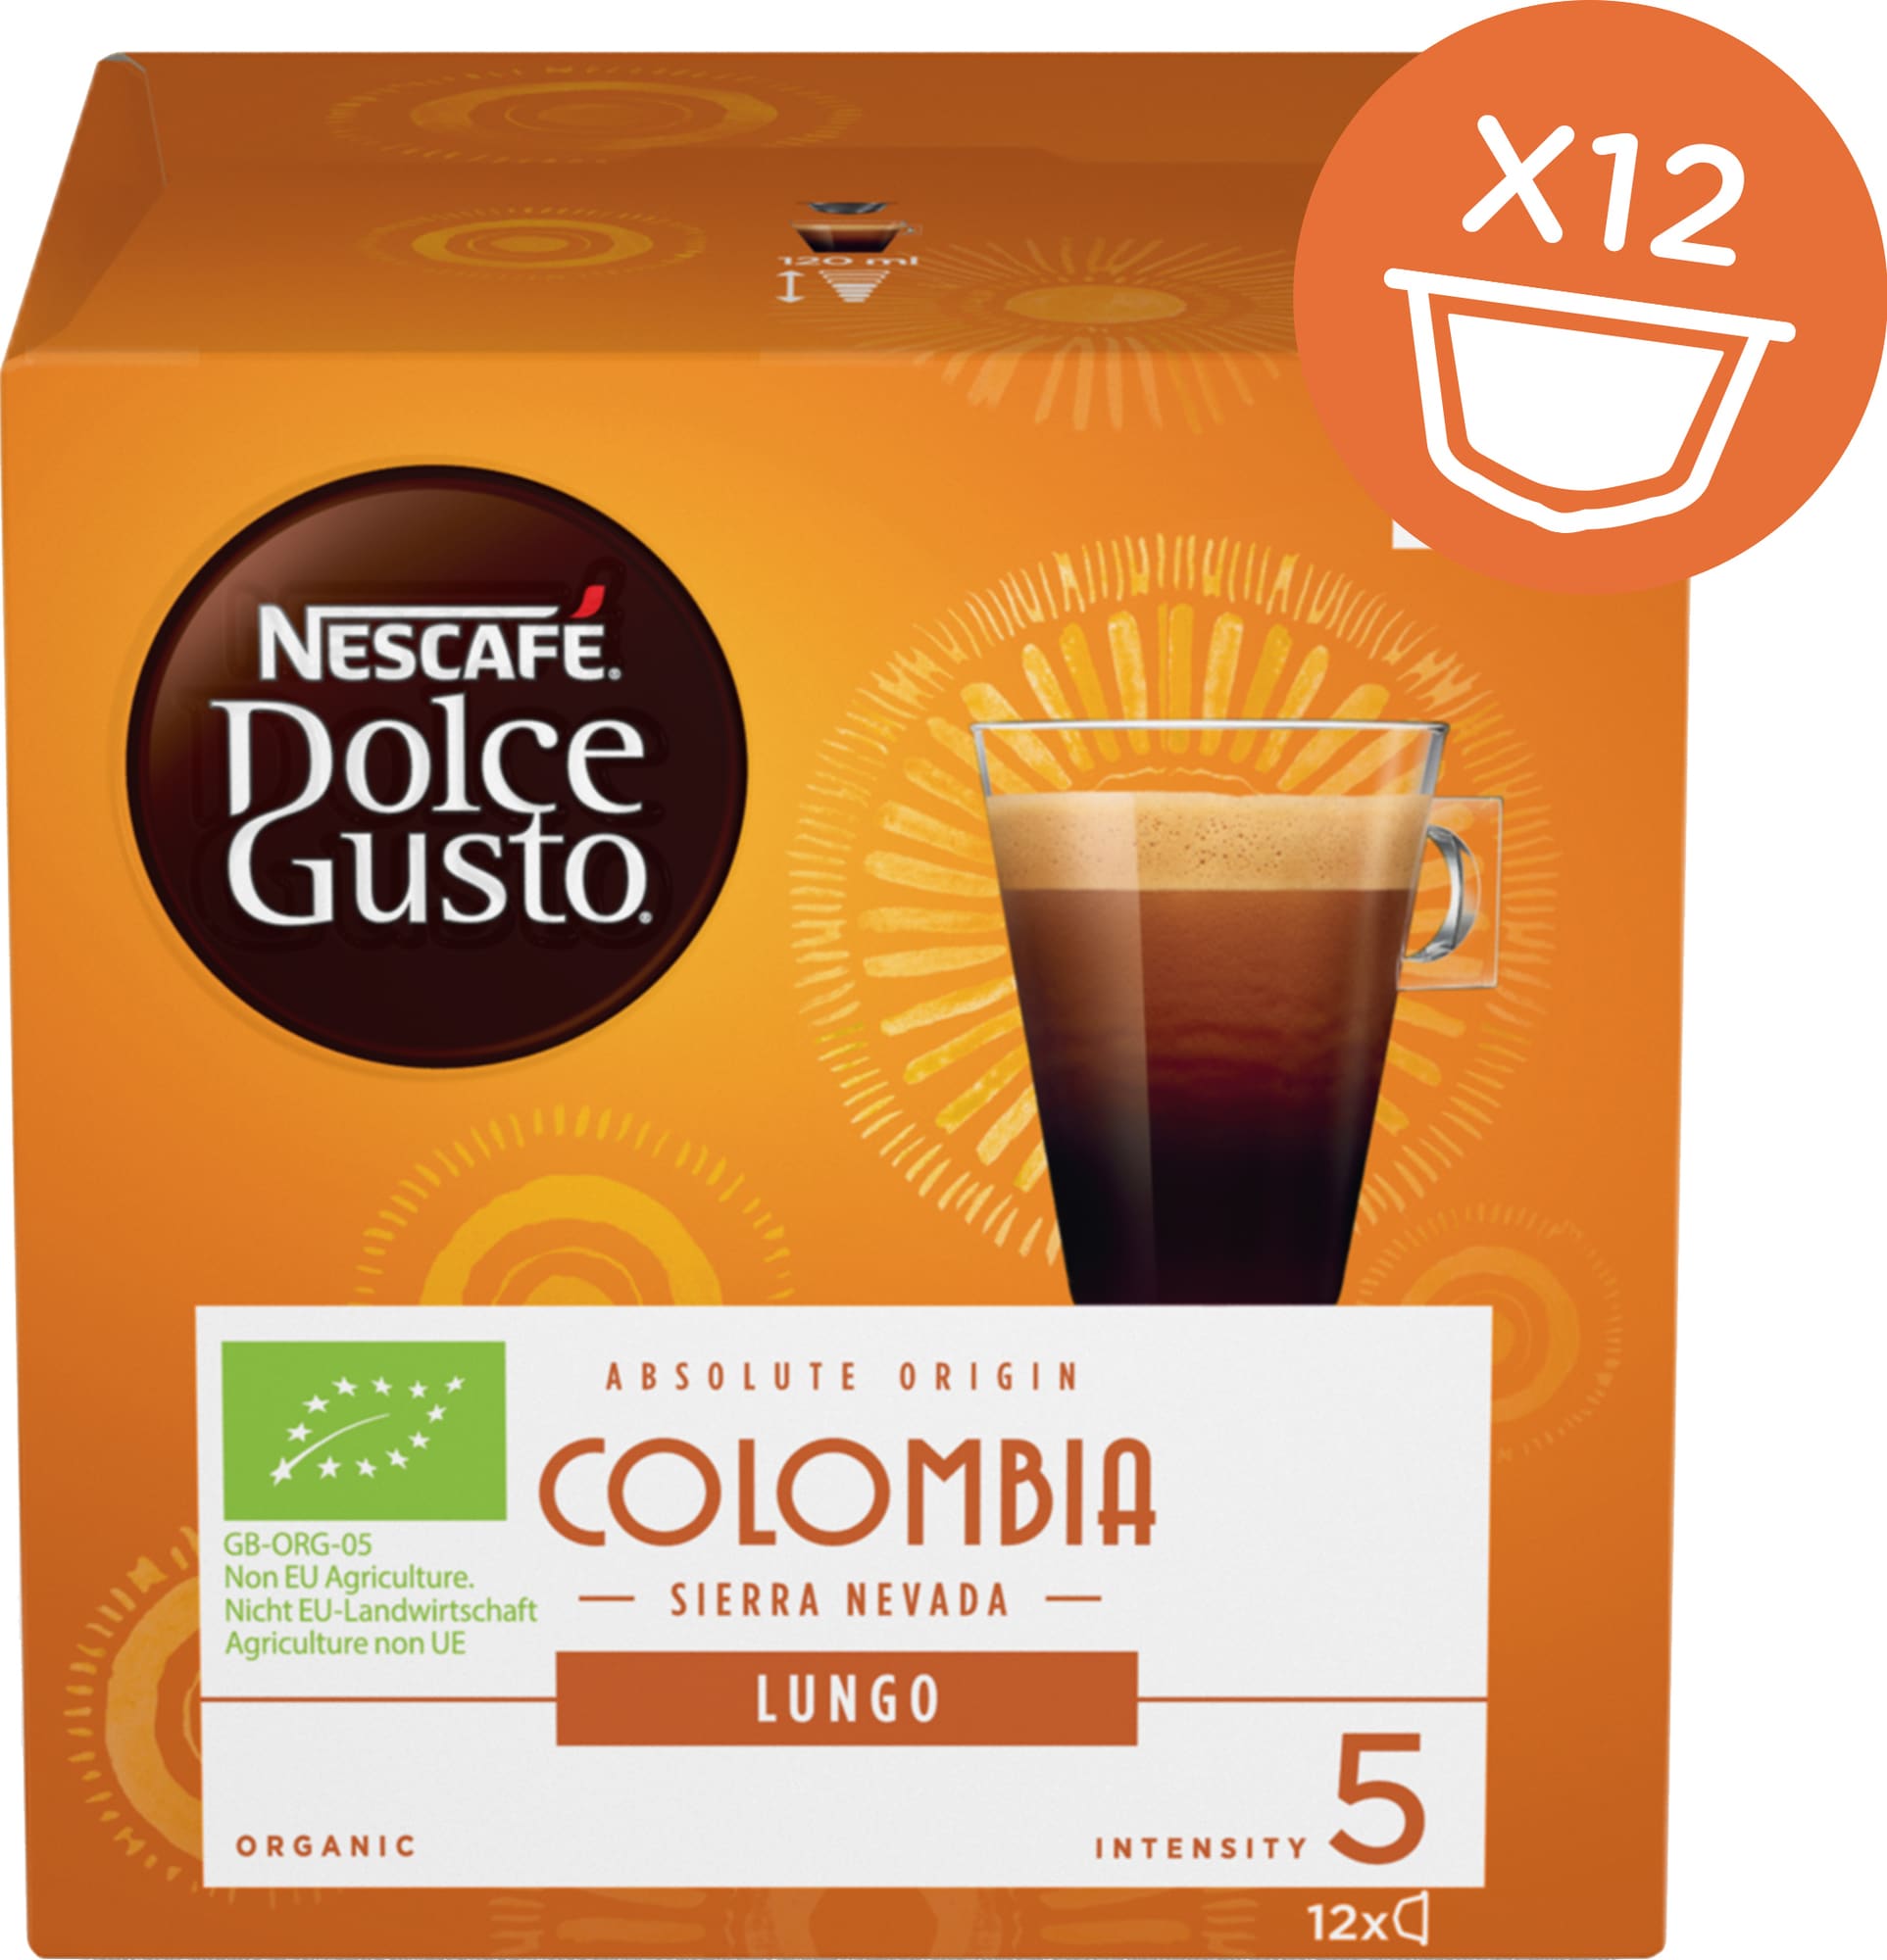 Nescafe Dolce Gusto Colombia Lungo Organic thumbnail